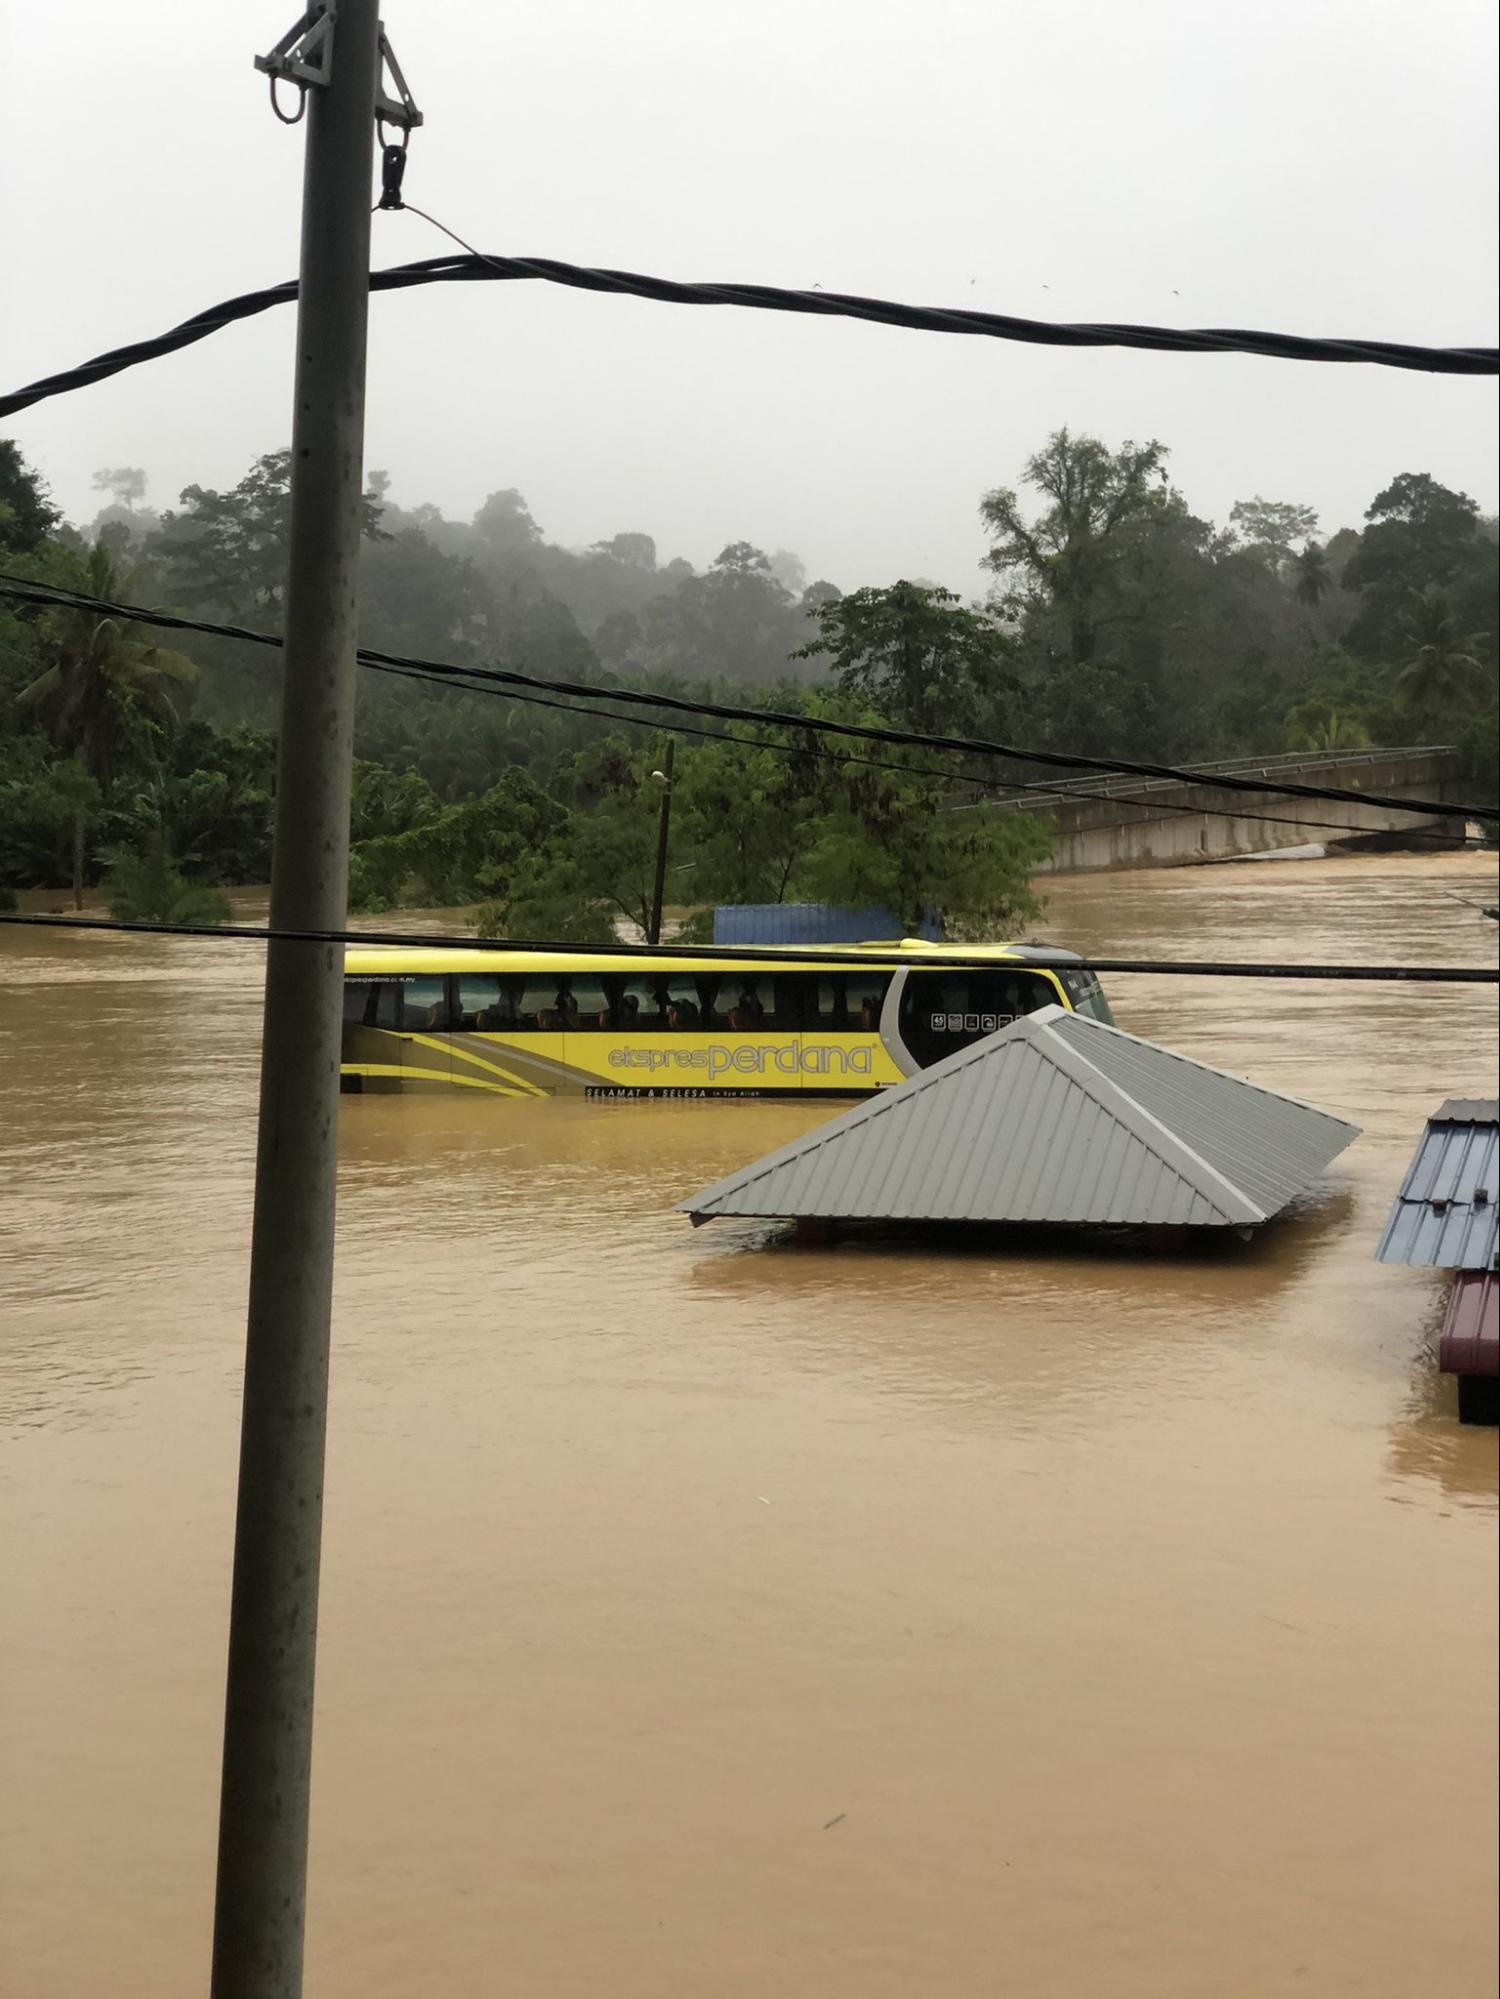 Express bus stranded in flood